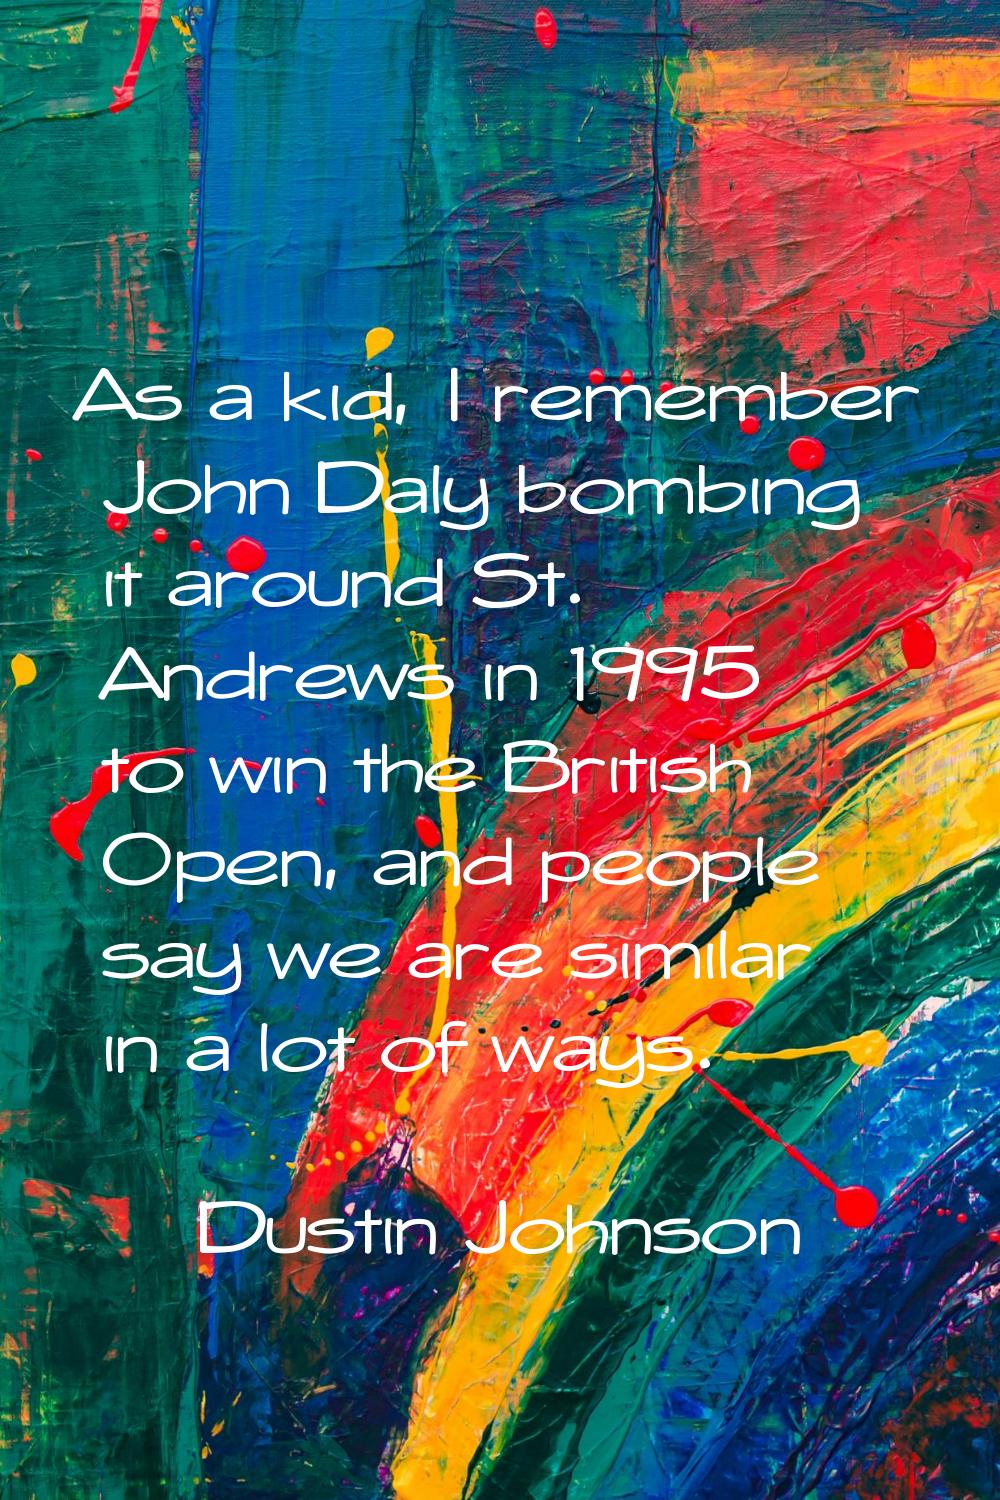 As a kid, I remember John Daly bombing it around St. Andrews in 1995 to win the British Open, and p